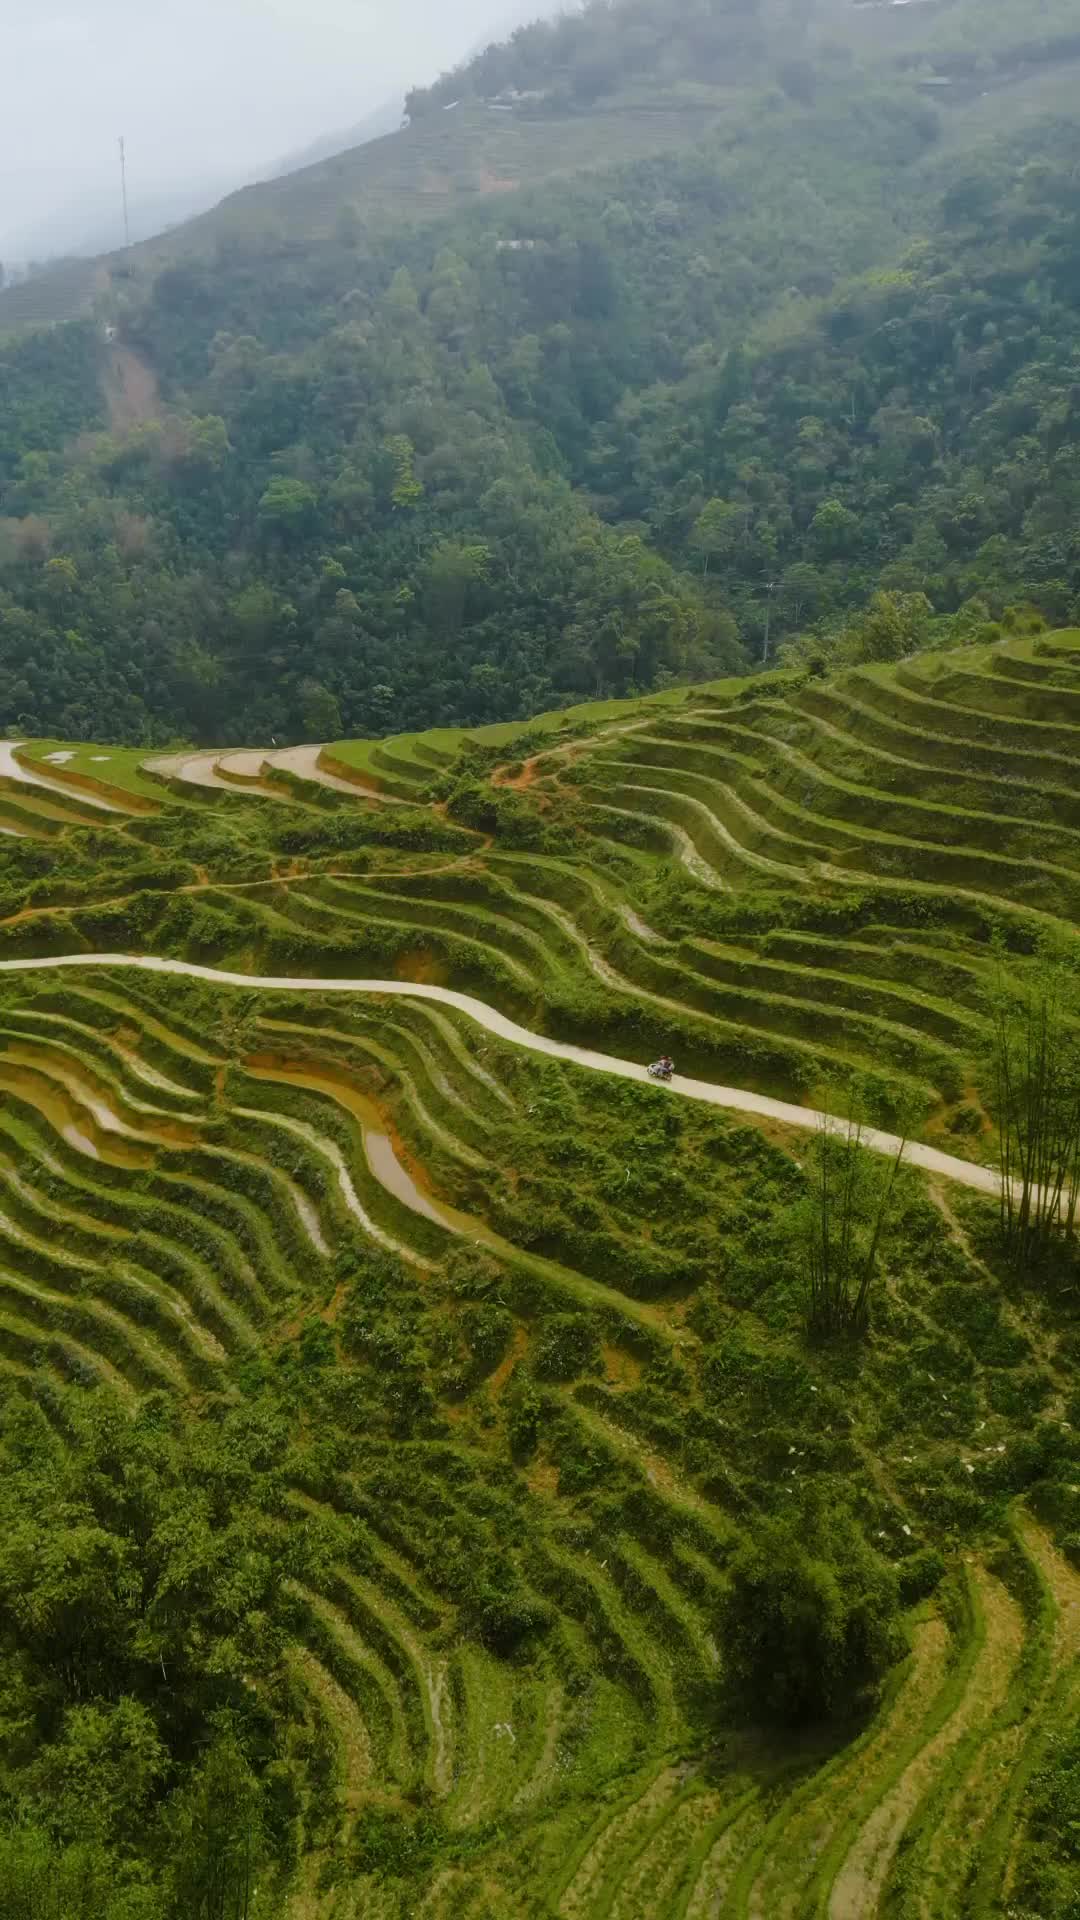 Driving through one of the most beautiful rice fields in the world 🤩 Even during the dry season when many rice fields are not as colorful as they could be it was still remarkable experience! Another check mark on our bucket list ❤️

📍Sapa, Lao Cai, Vietnam 🇻🇳 

#vietnam #travel #earth #earthfocus #earthofficial #earthoutdoors #earthcapture #earthpix #discoverearth #discoverglobe #awesome_earthpix #explore #exploremore #drone #droneofficial #dji #djiglobal #folk #folkscenery #folkgreen #ricefield #earthporn #couple #welivetravel #welivetoexplore #travelblogger #travelgram #wanderlust #couplegoals